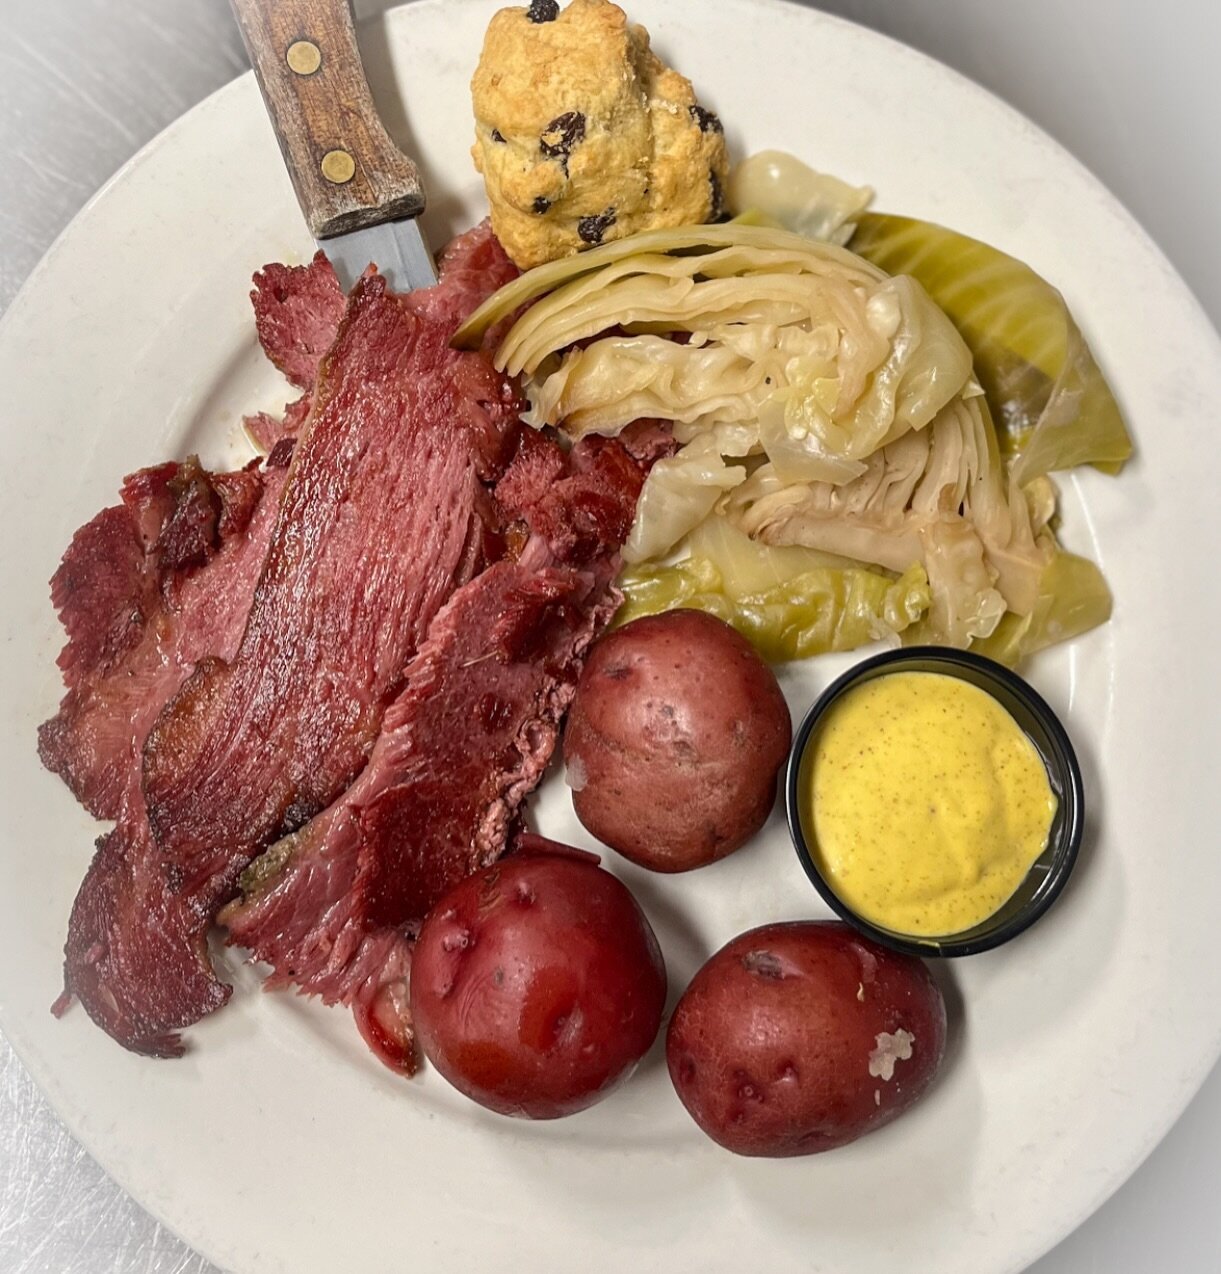 .
🍀 HAPPY ST. PATRICKS DAY 🍀

&mdash;we will be serving Corned Beef &amp; Cabbage specials all day! Lunch and dinner, dine in or take out!! Served with roasted New potatoes and Irish soda Bread. 

#stpatricksday #cornedbeefandcabbage #cornedbeef #q